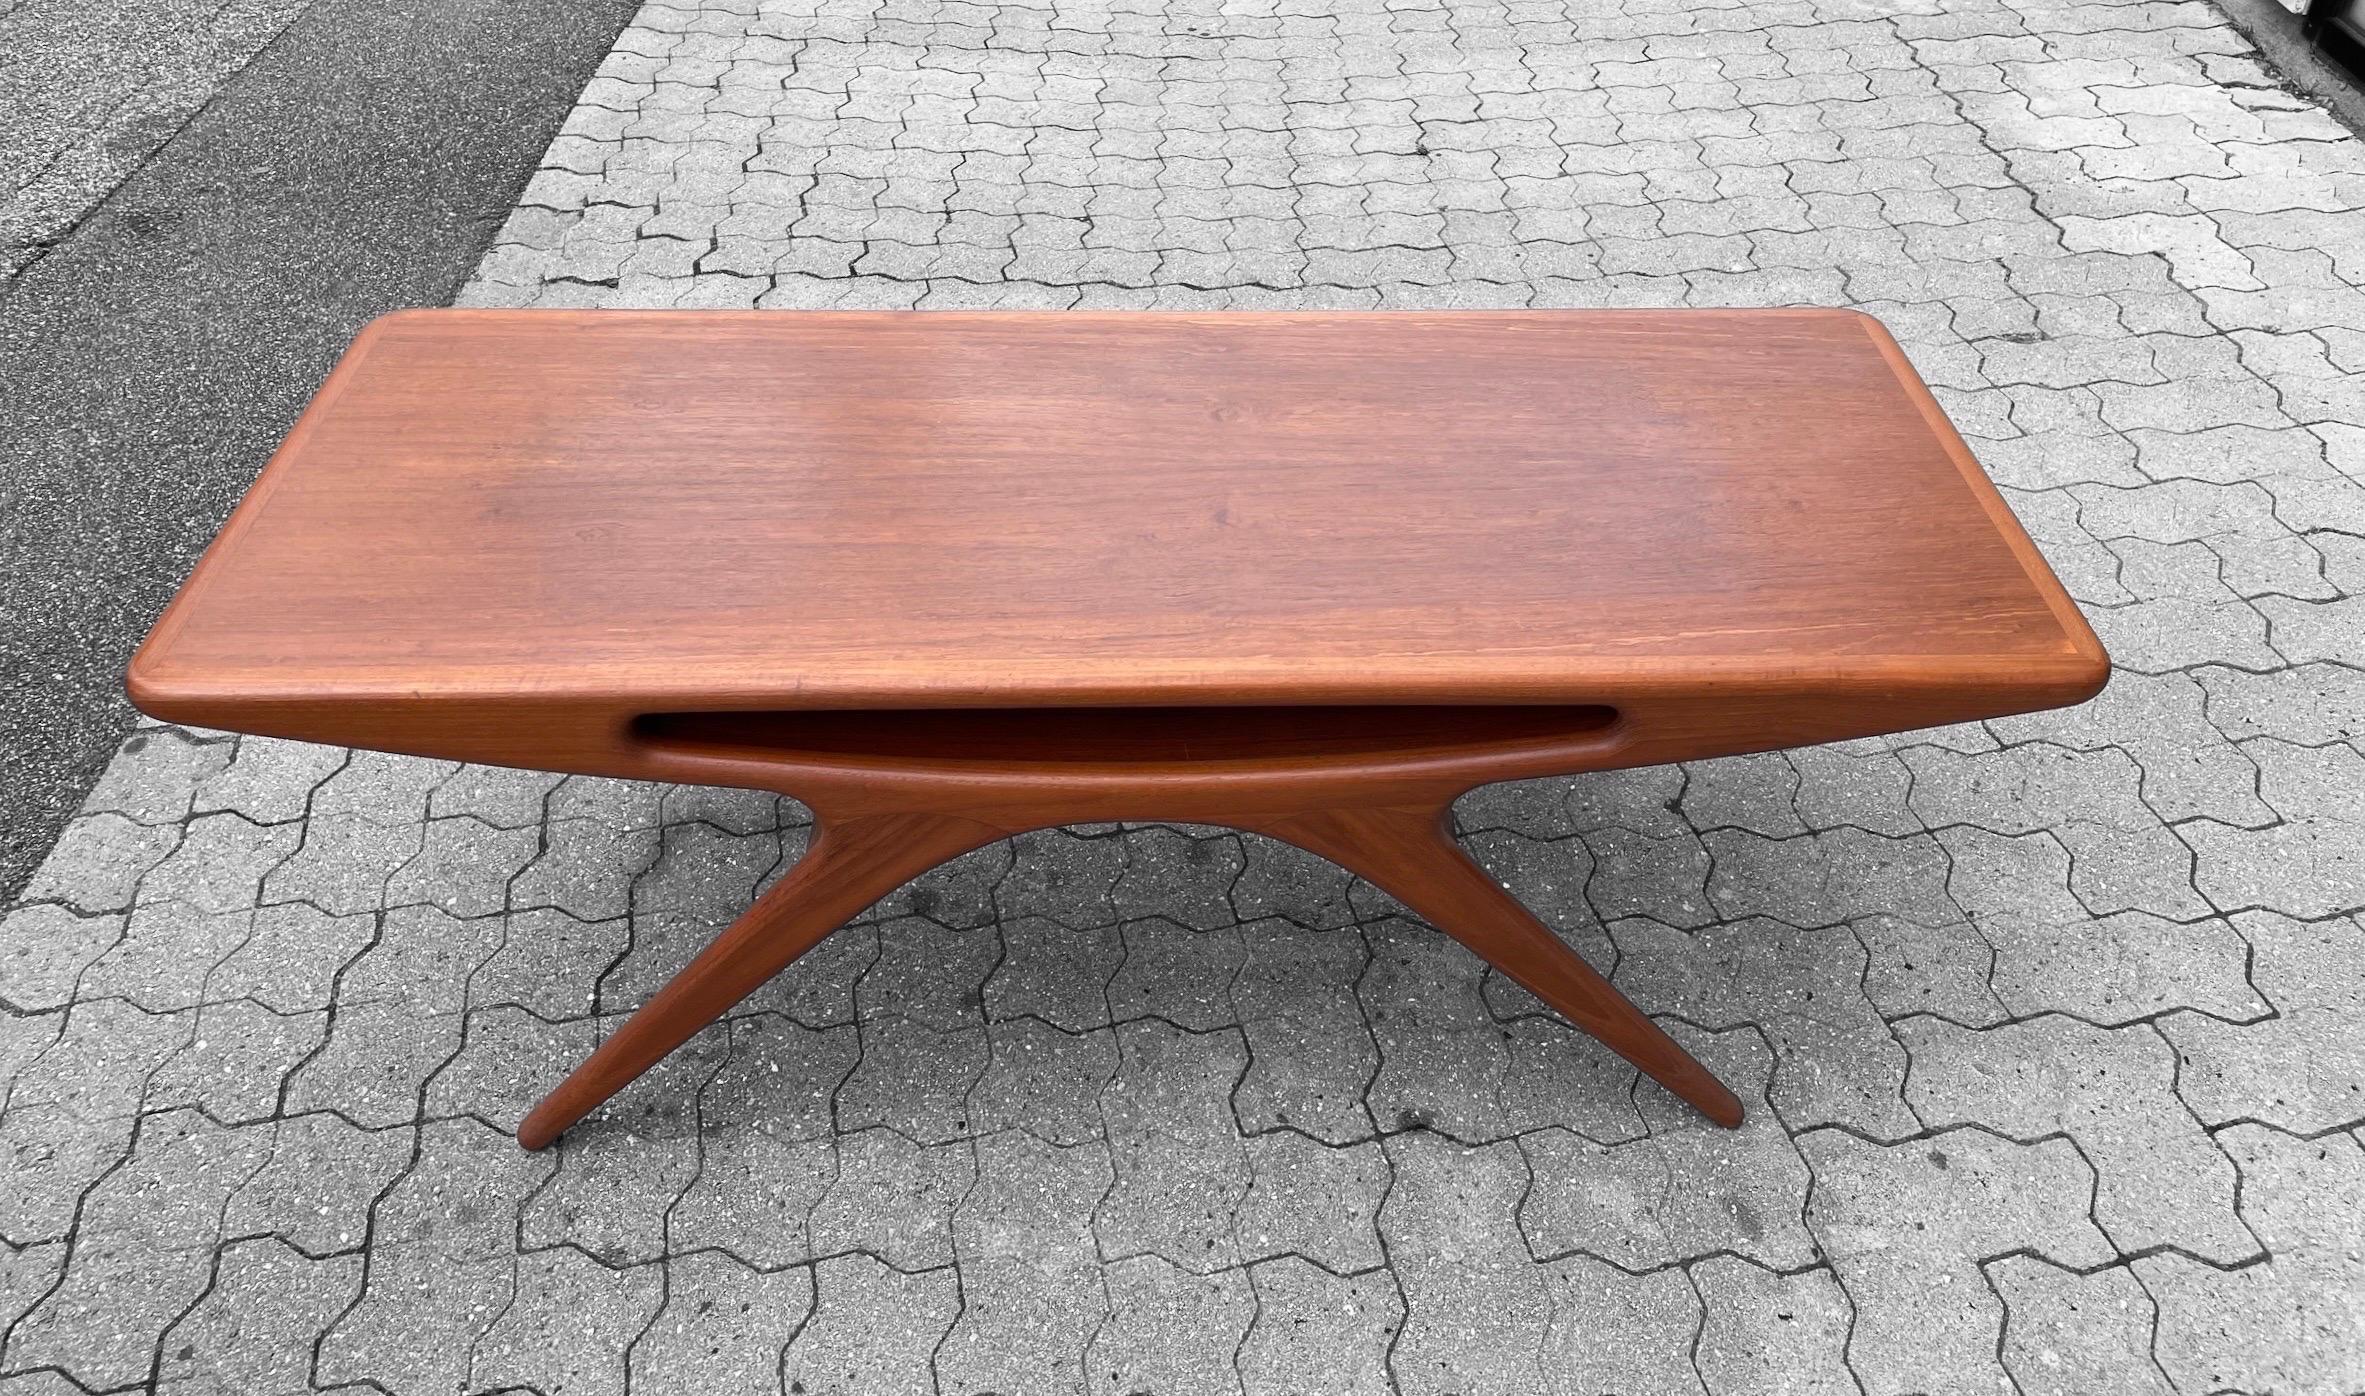 The beautiful danish teak coffee table called SMILET, designed by danish furniture designer Johannes Andersen in the 50-60s

Beautiful table with only a few marks.